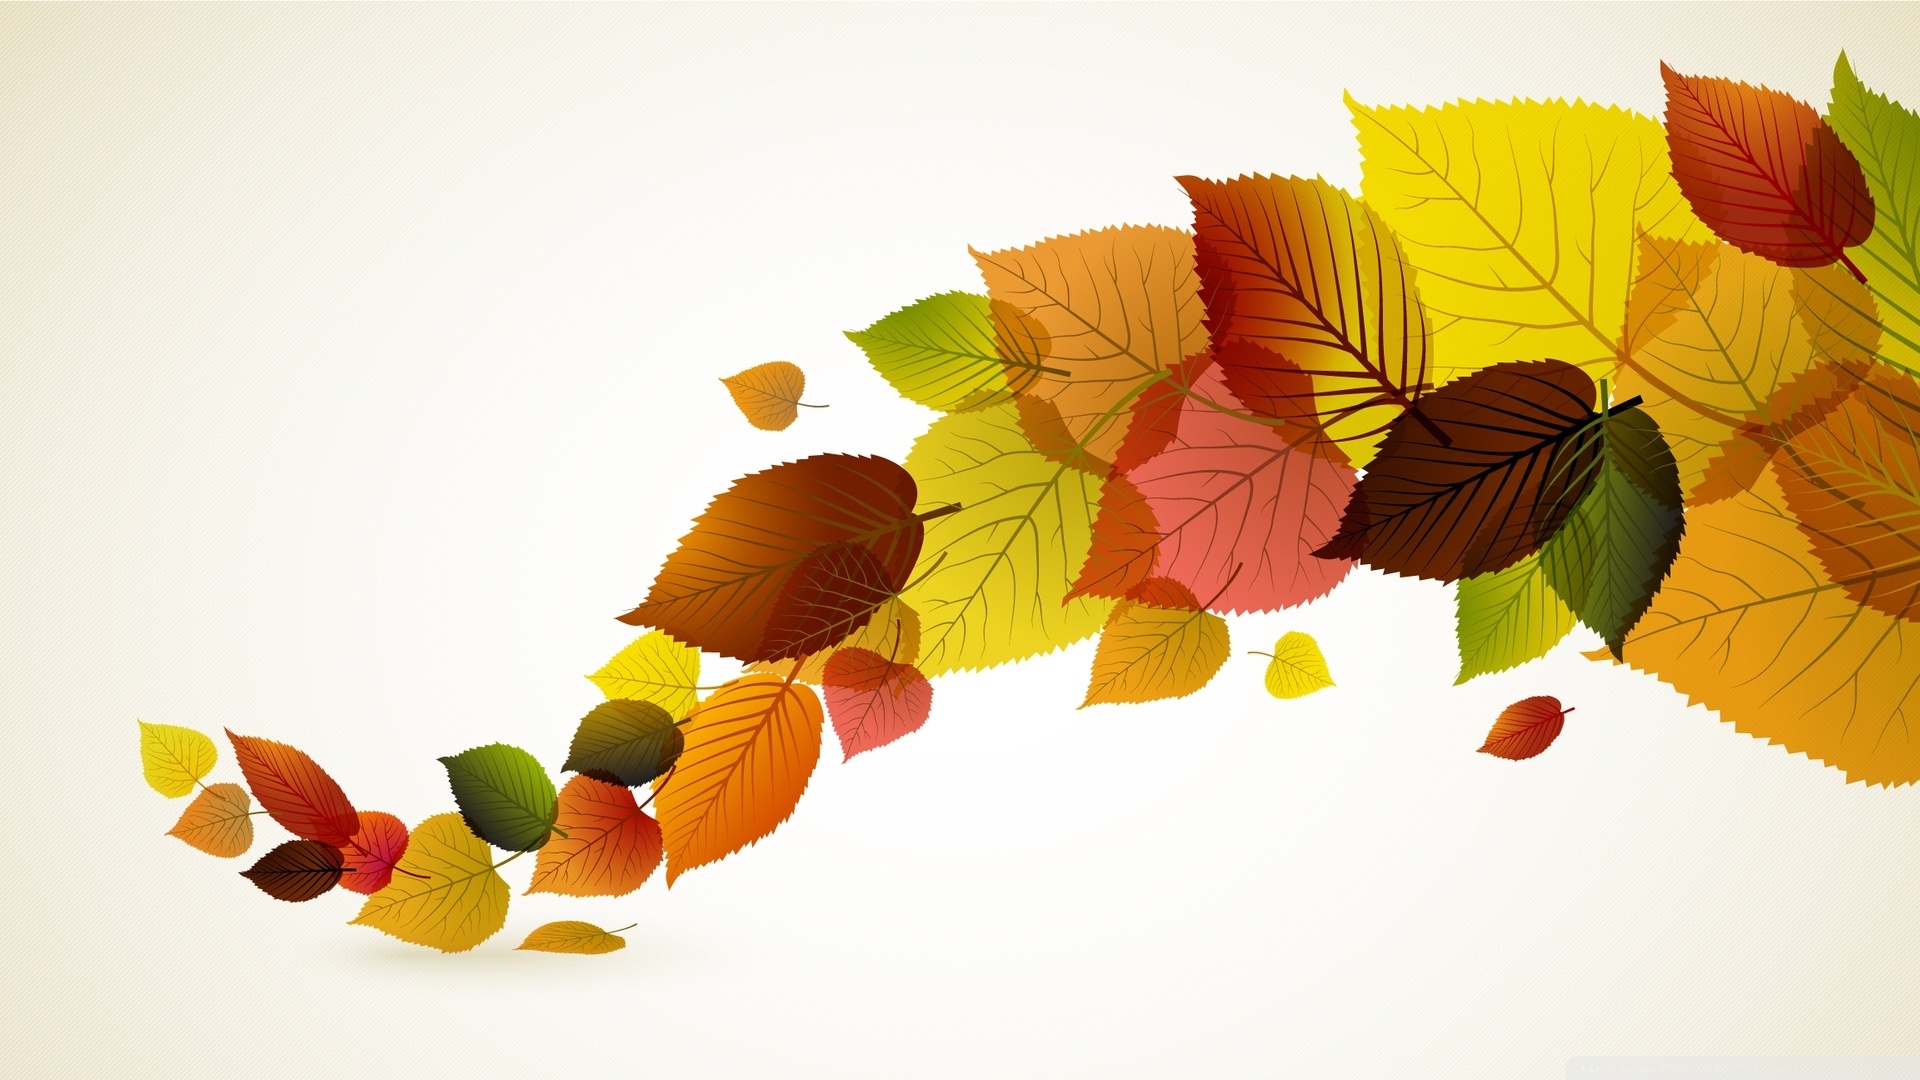 HD wallpaper autumn leaves background colorful rainbow maple wood   Wallpaper Flare